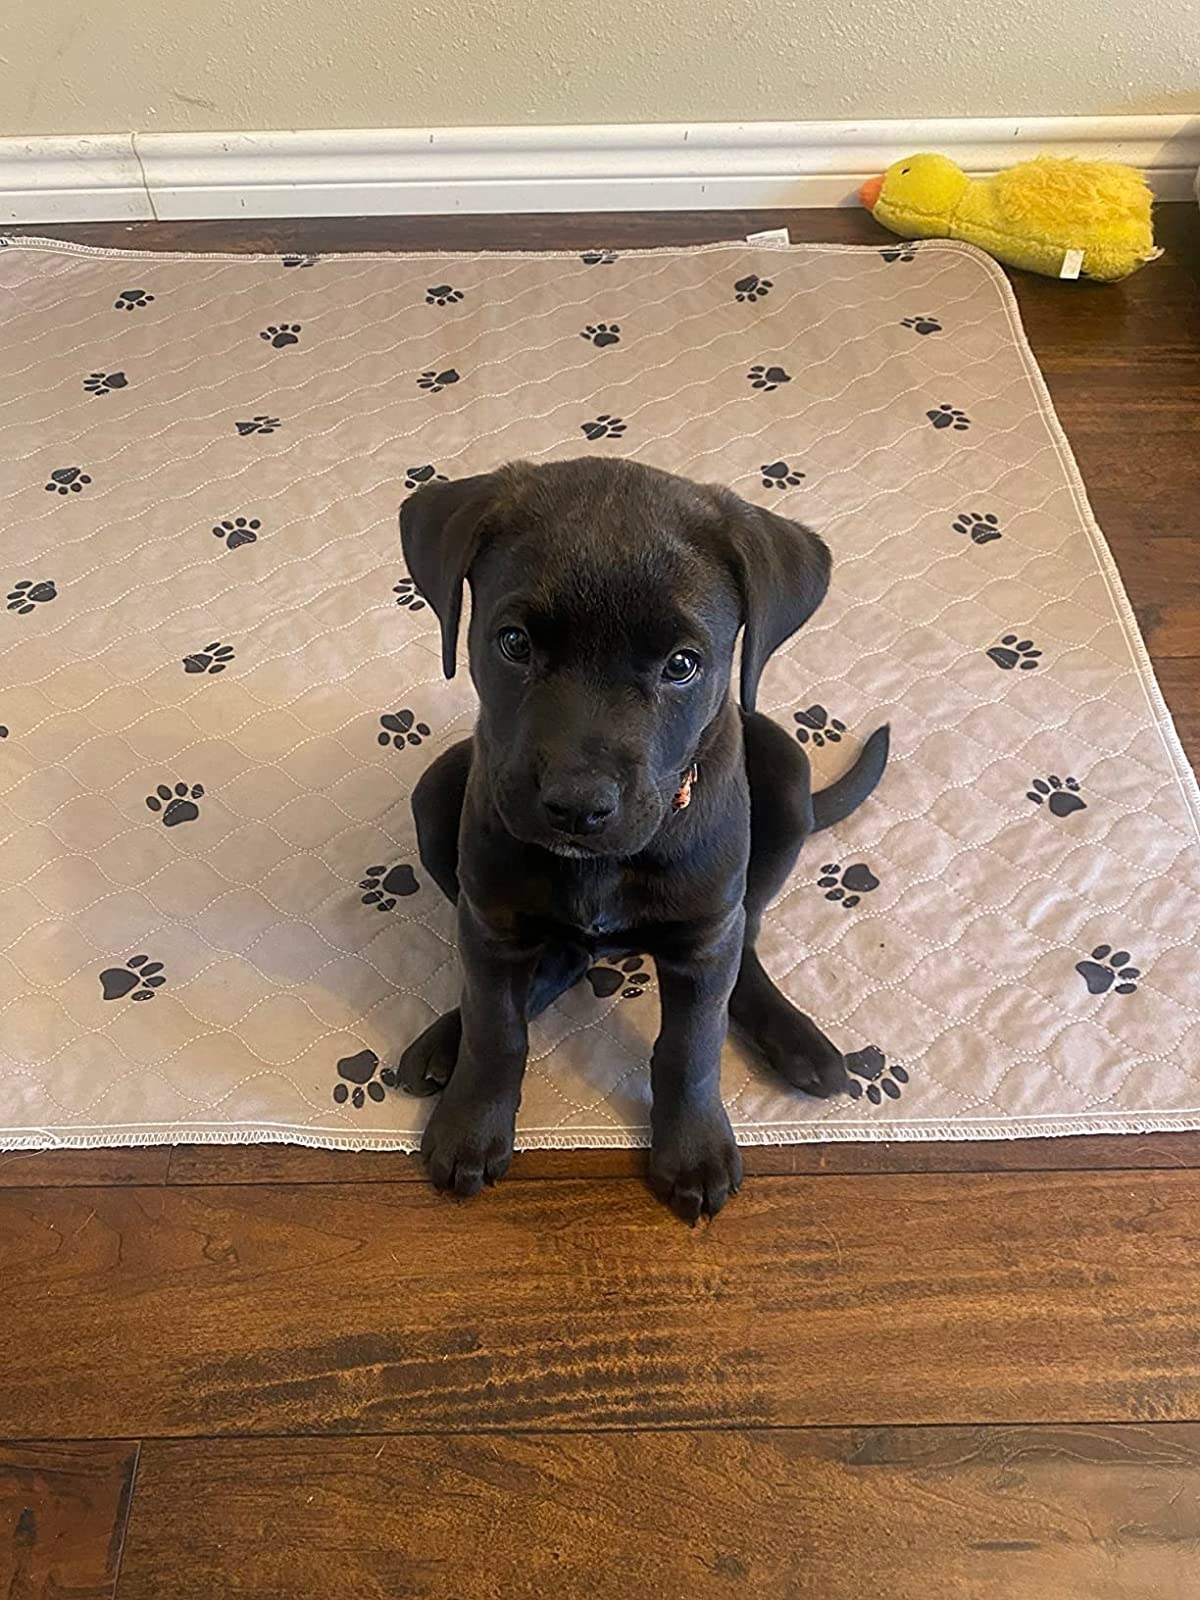 Reviewer image of their puppy sitting on the paw-print pee pad